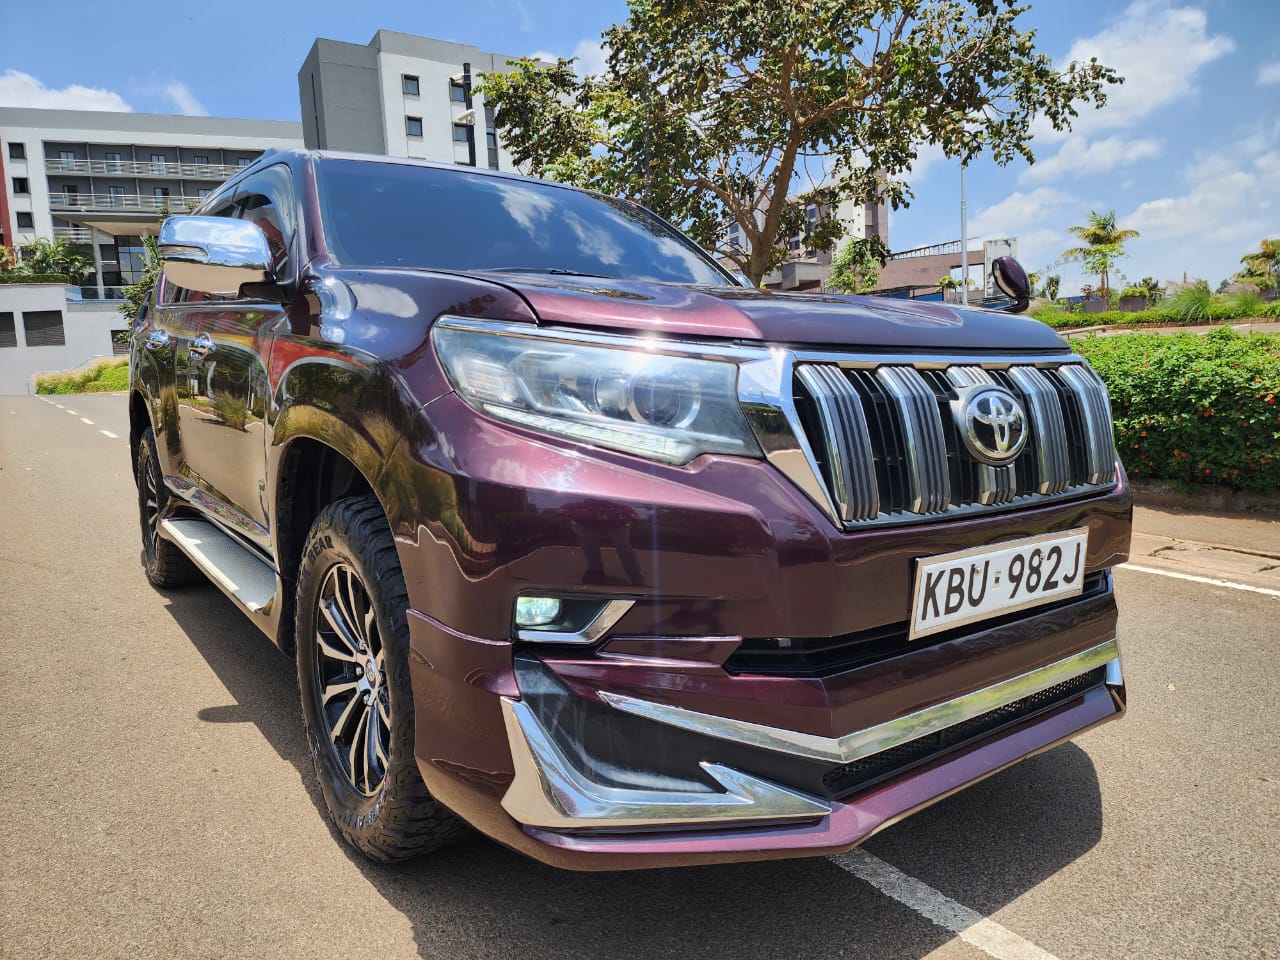 Toyota Prado j150 2018 Facelift with SUNROOF QUICK SALE You Pay 30% Deposit Trade in OK